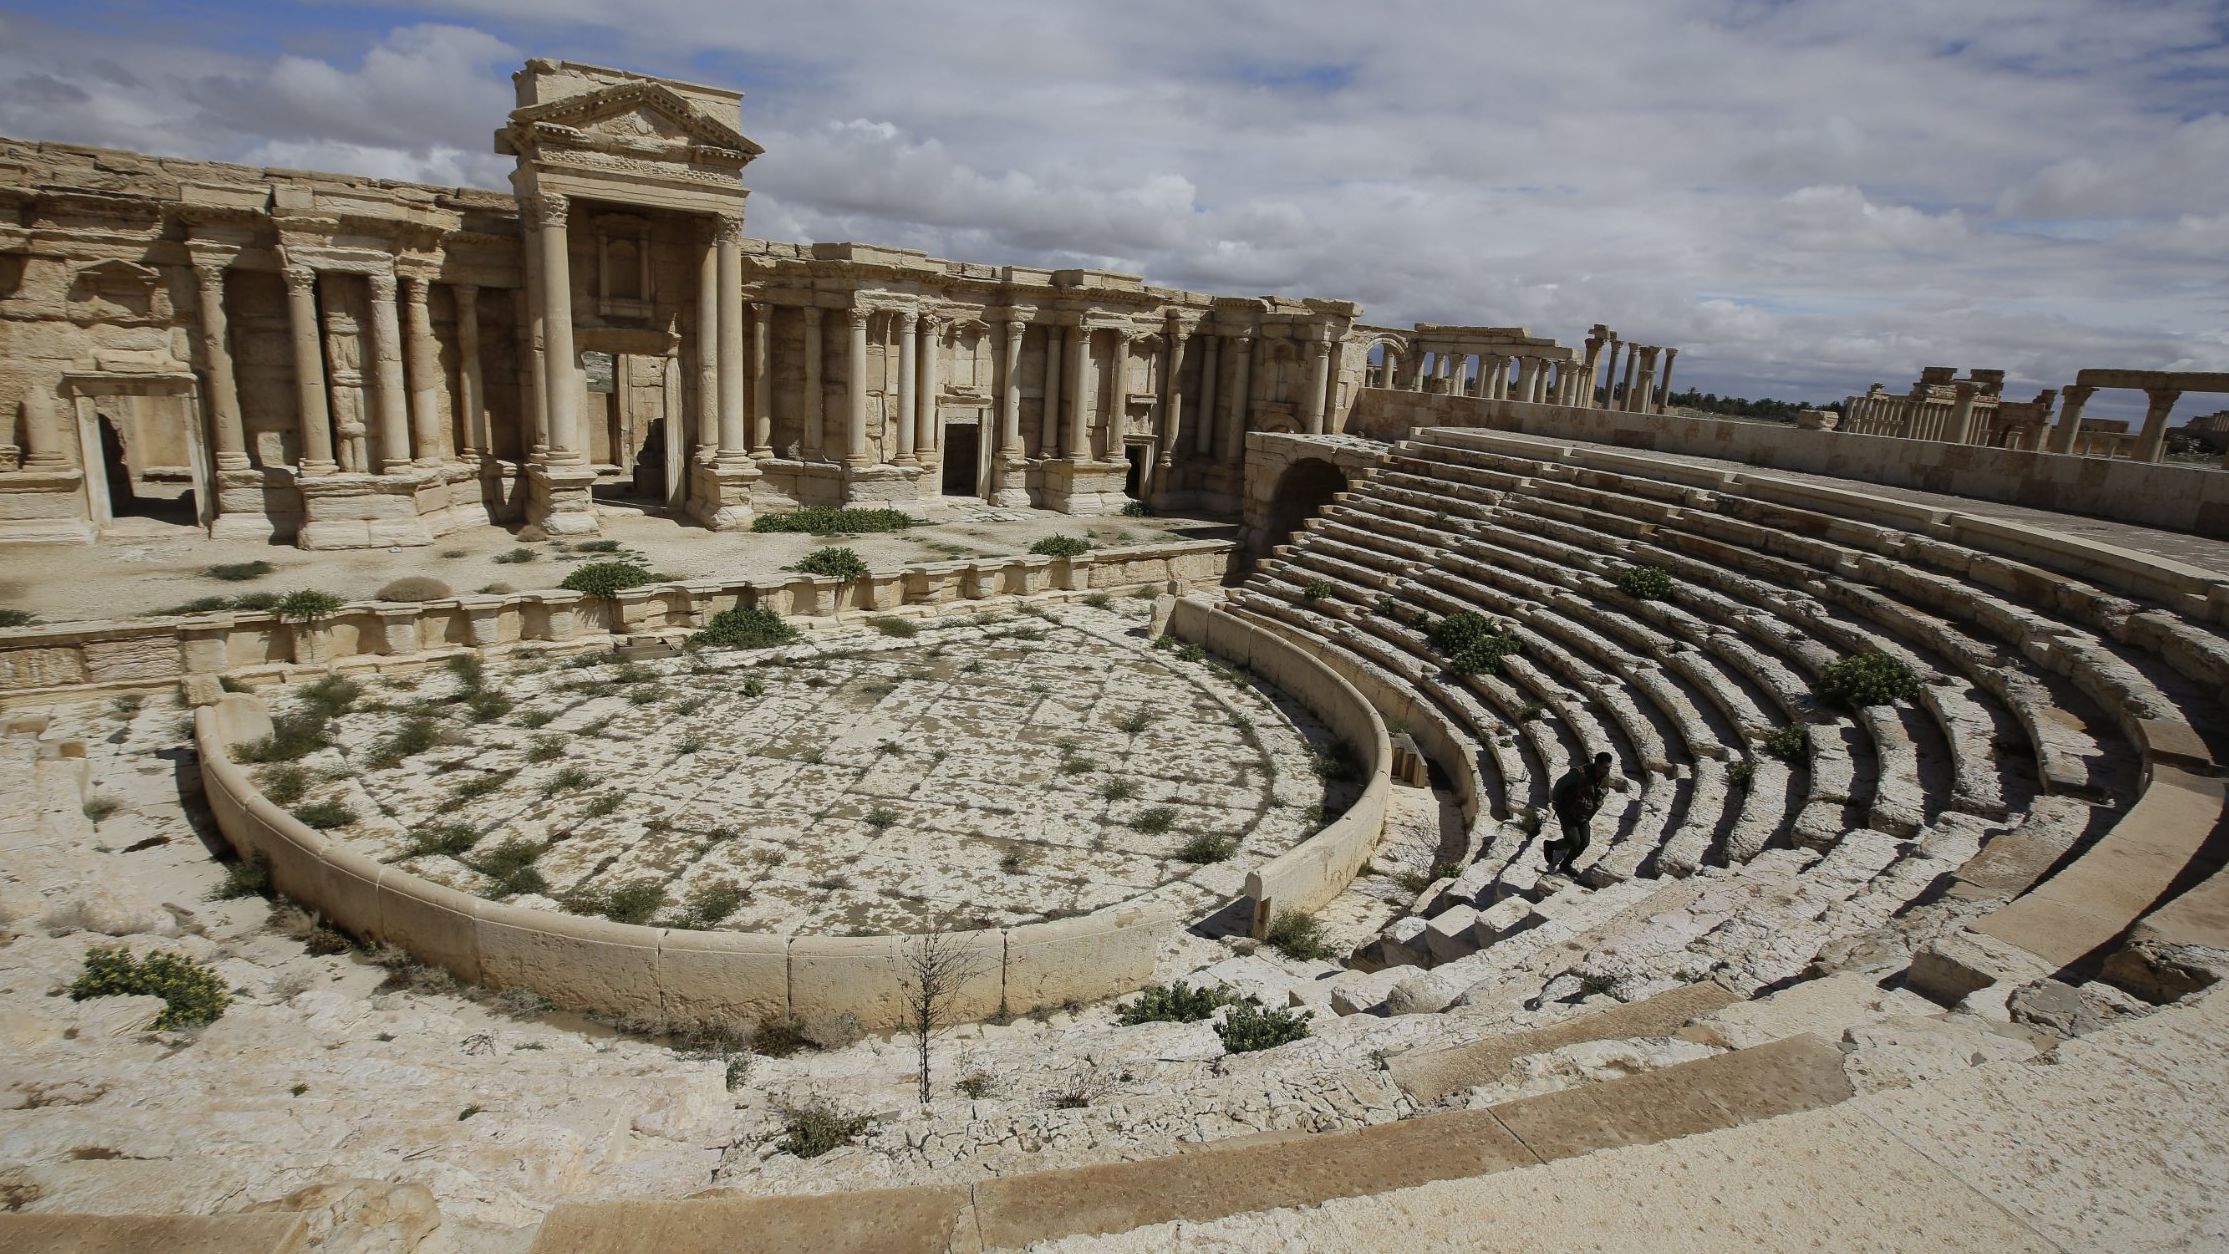 The amphitheater in the ancient oasis city of Palmyra, Syria, before it was captured by ISIS.